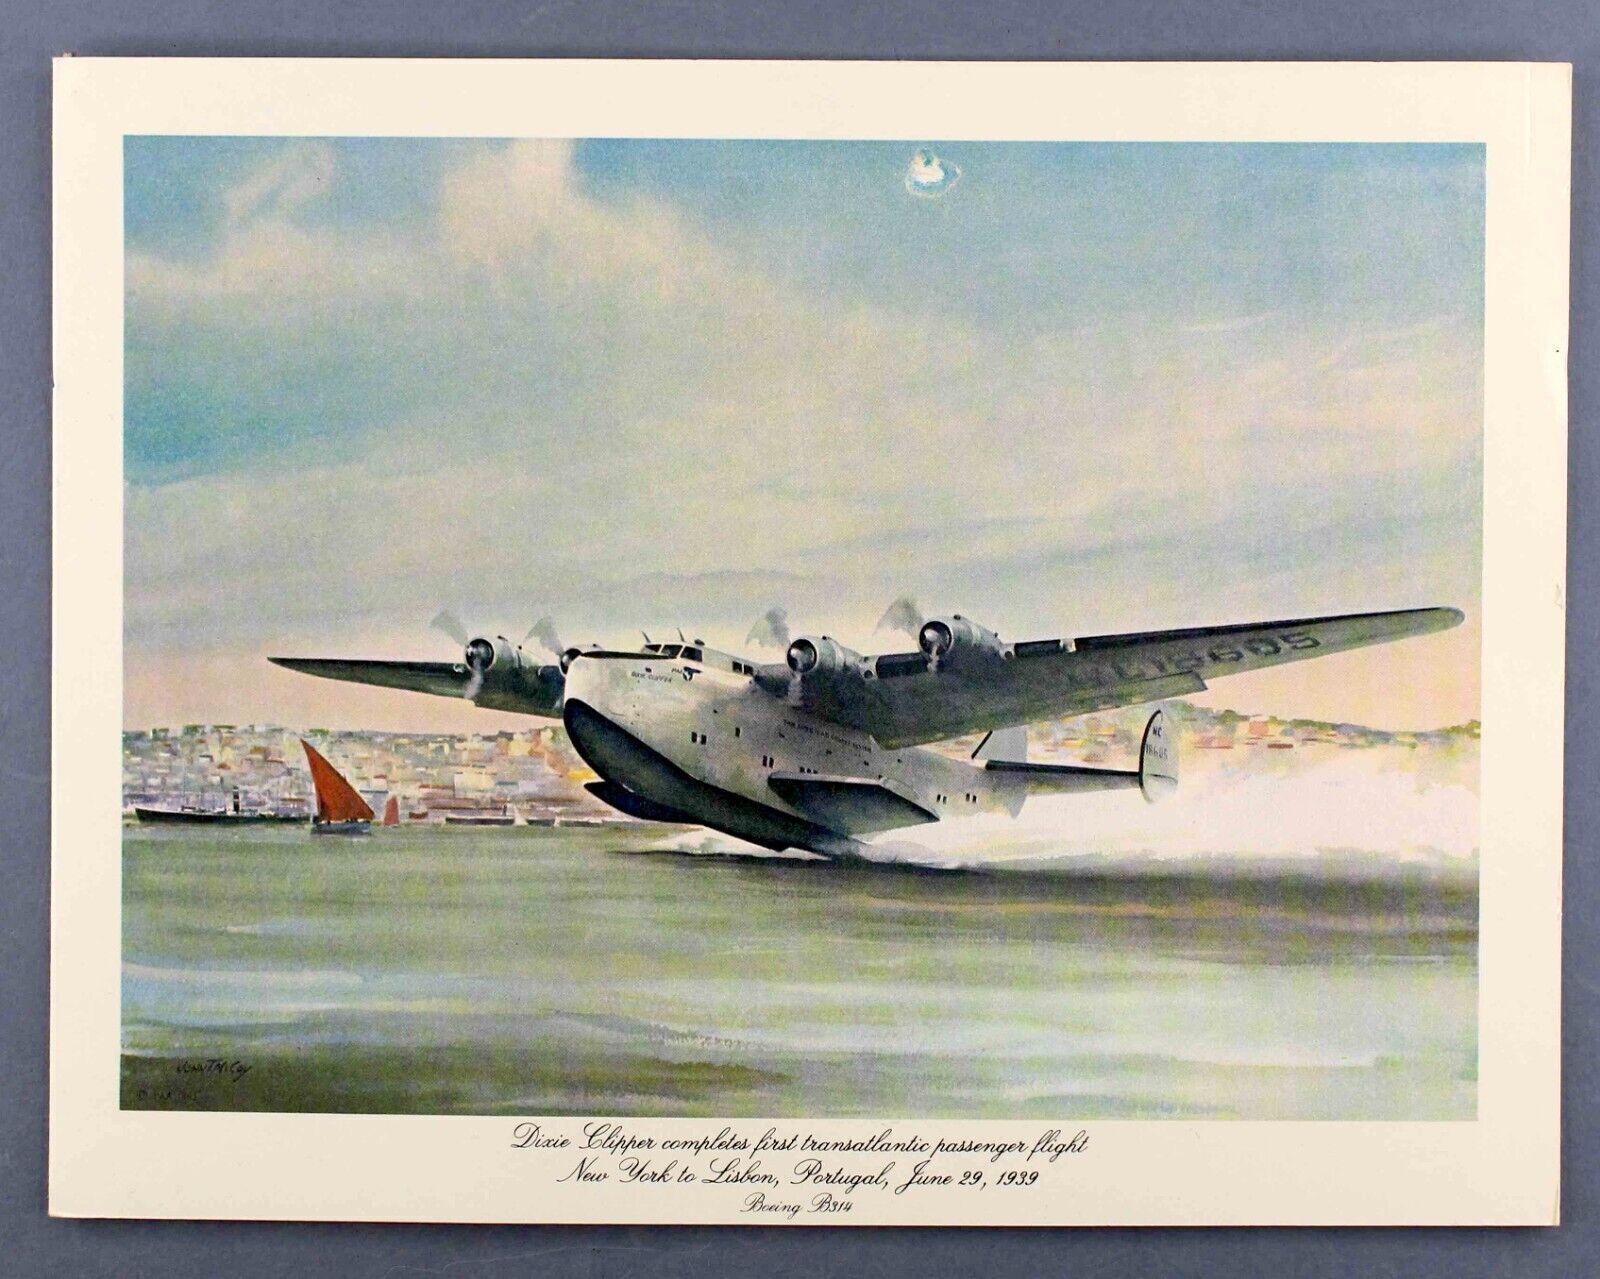 PAN AM VINTAGE FIRST CLASS AIRLINE MENU BOEING B314 DIXIE CLIPPER FLYING BOAT PA